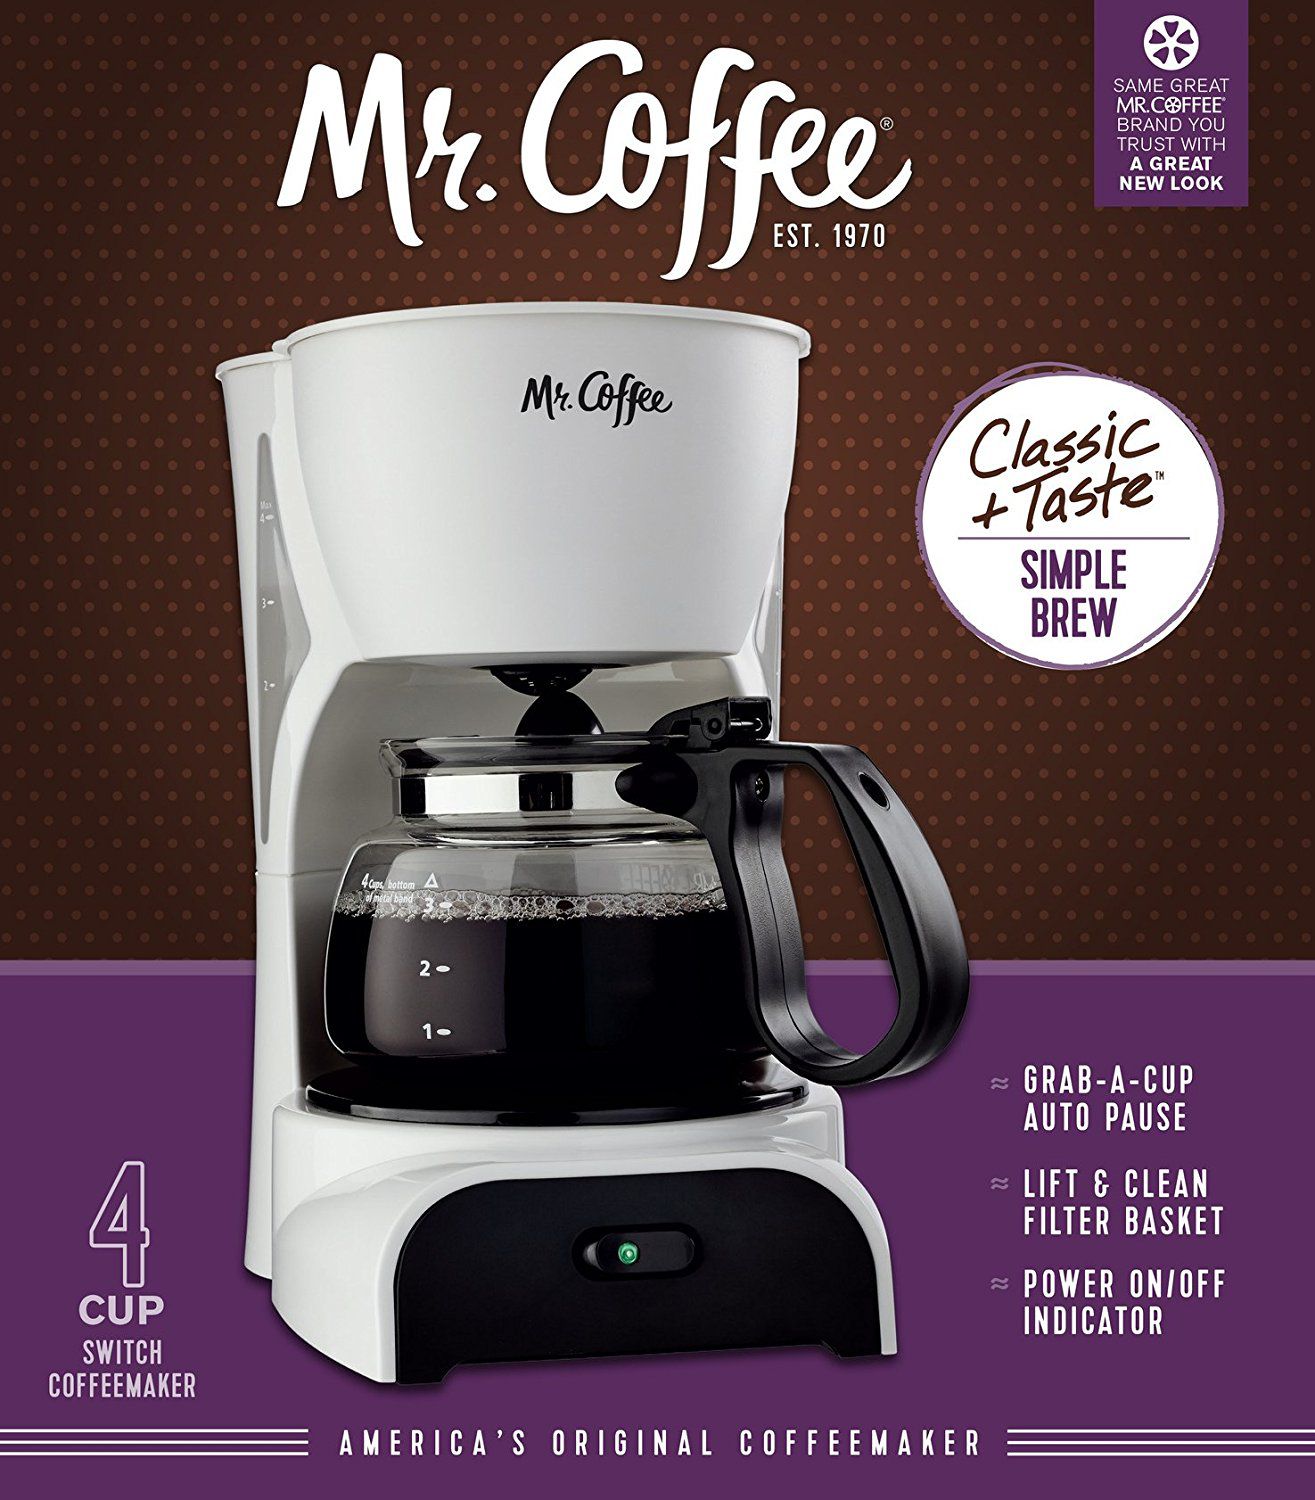 https://buymorecoffee.com/wp-content/uploads/2017/09/Mr.-Coffee-DR4-NP-Coffeemaker-4-Cup2.jpg